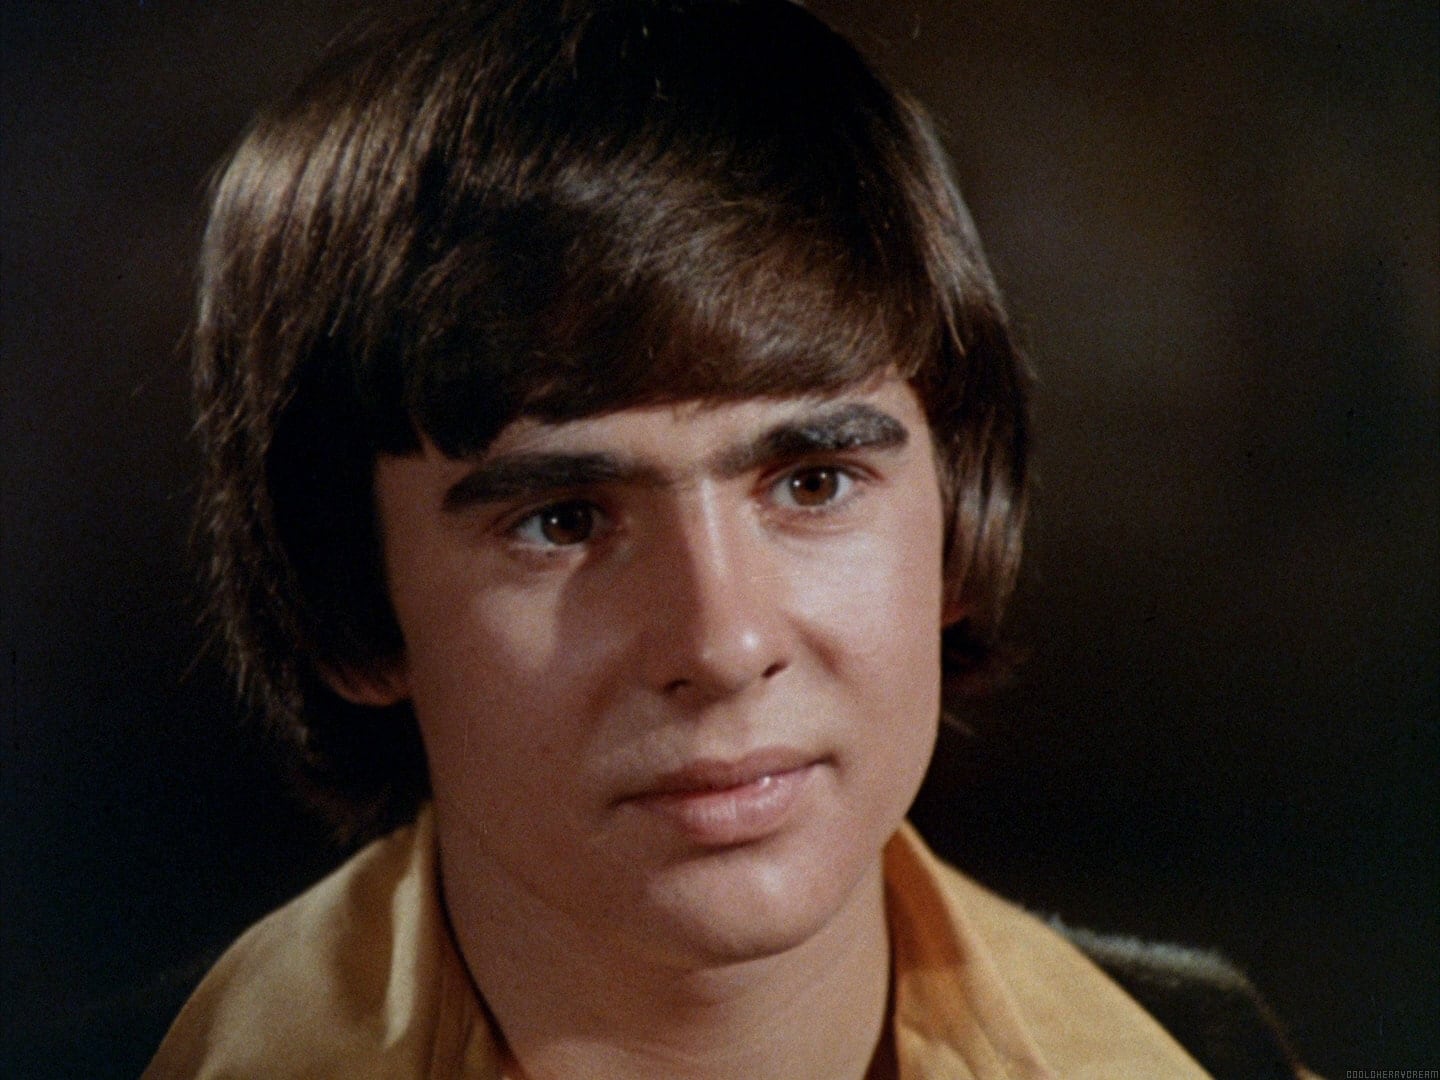 Here Come The Monkees (The Pilot) - Davy Jones